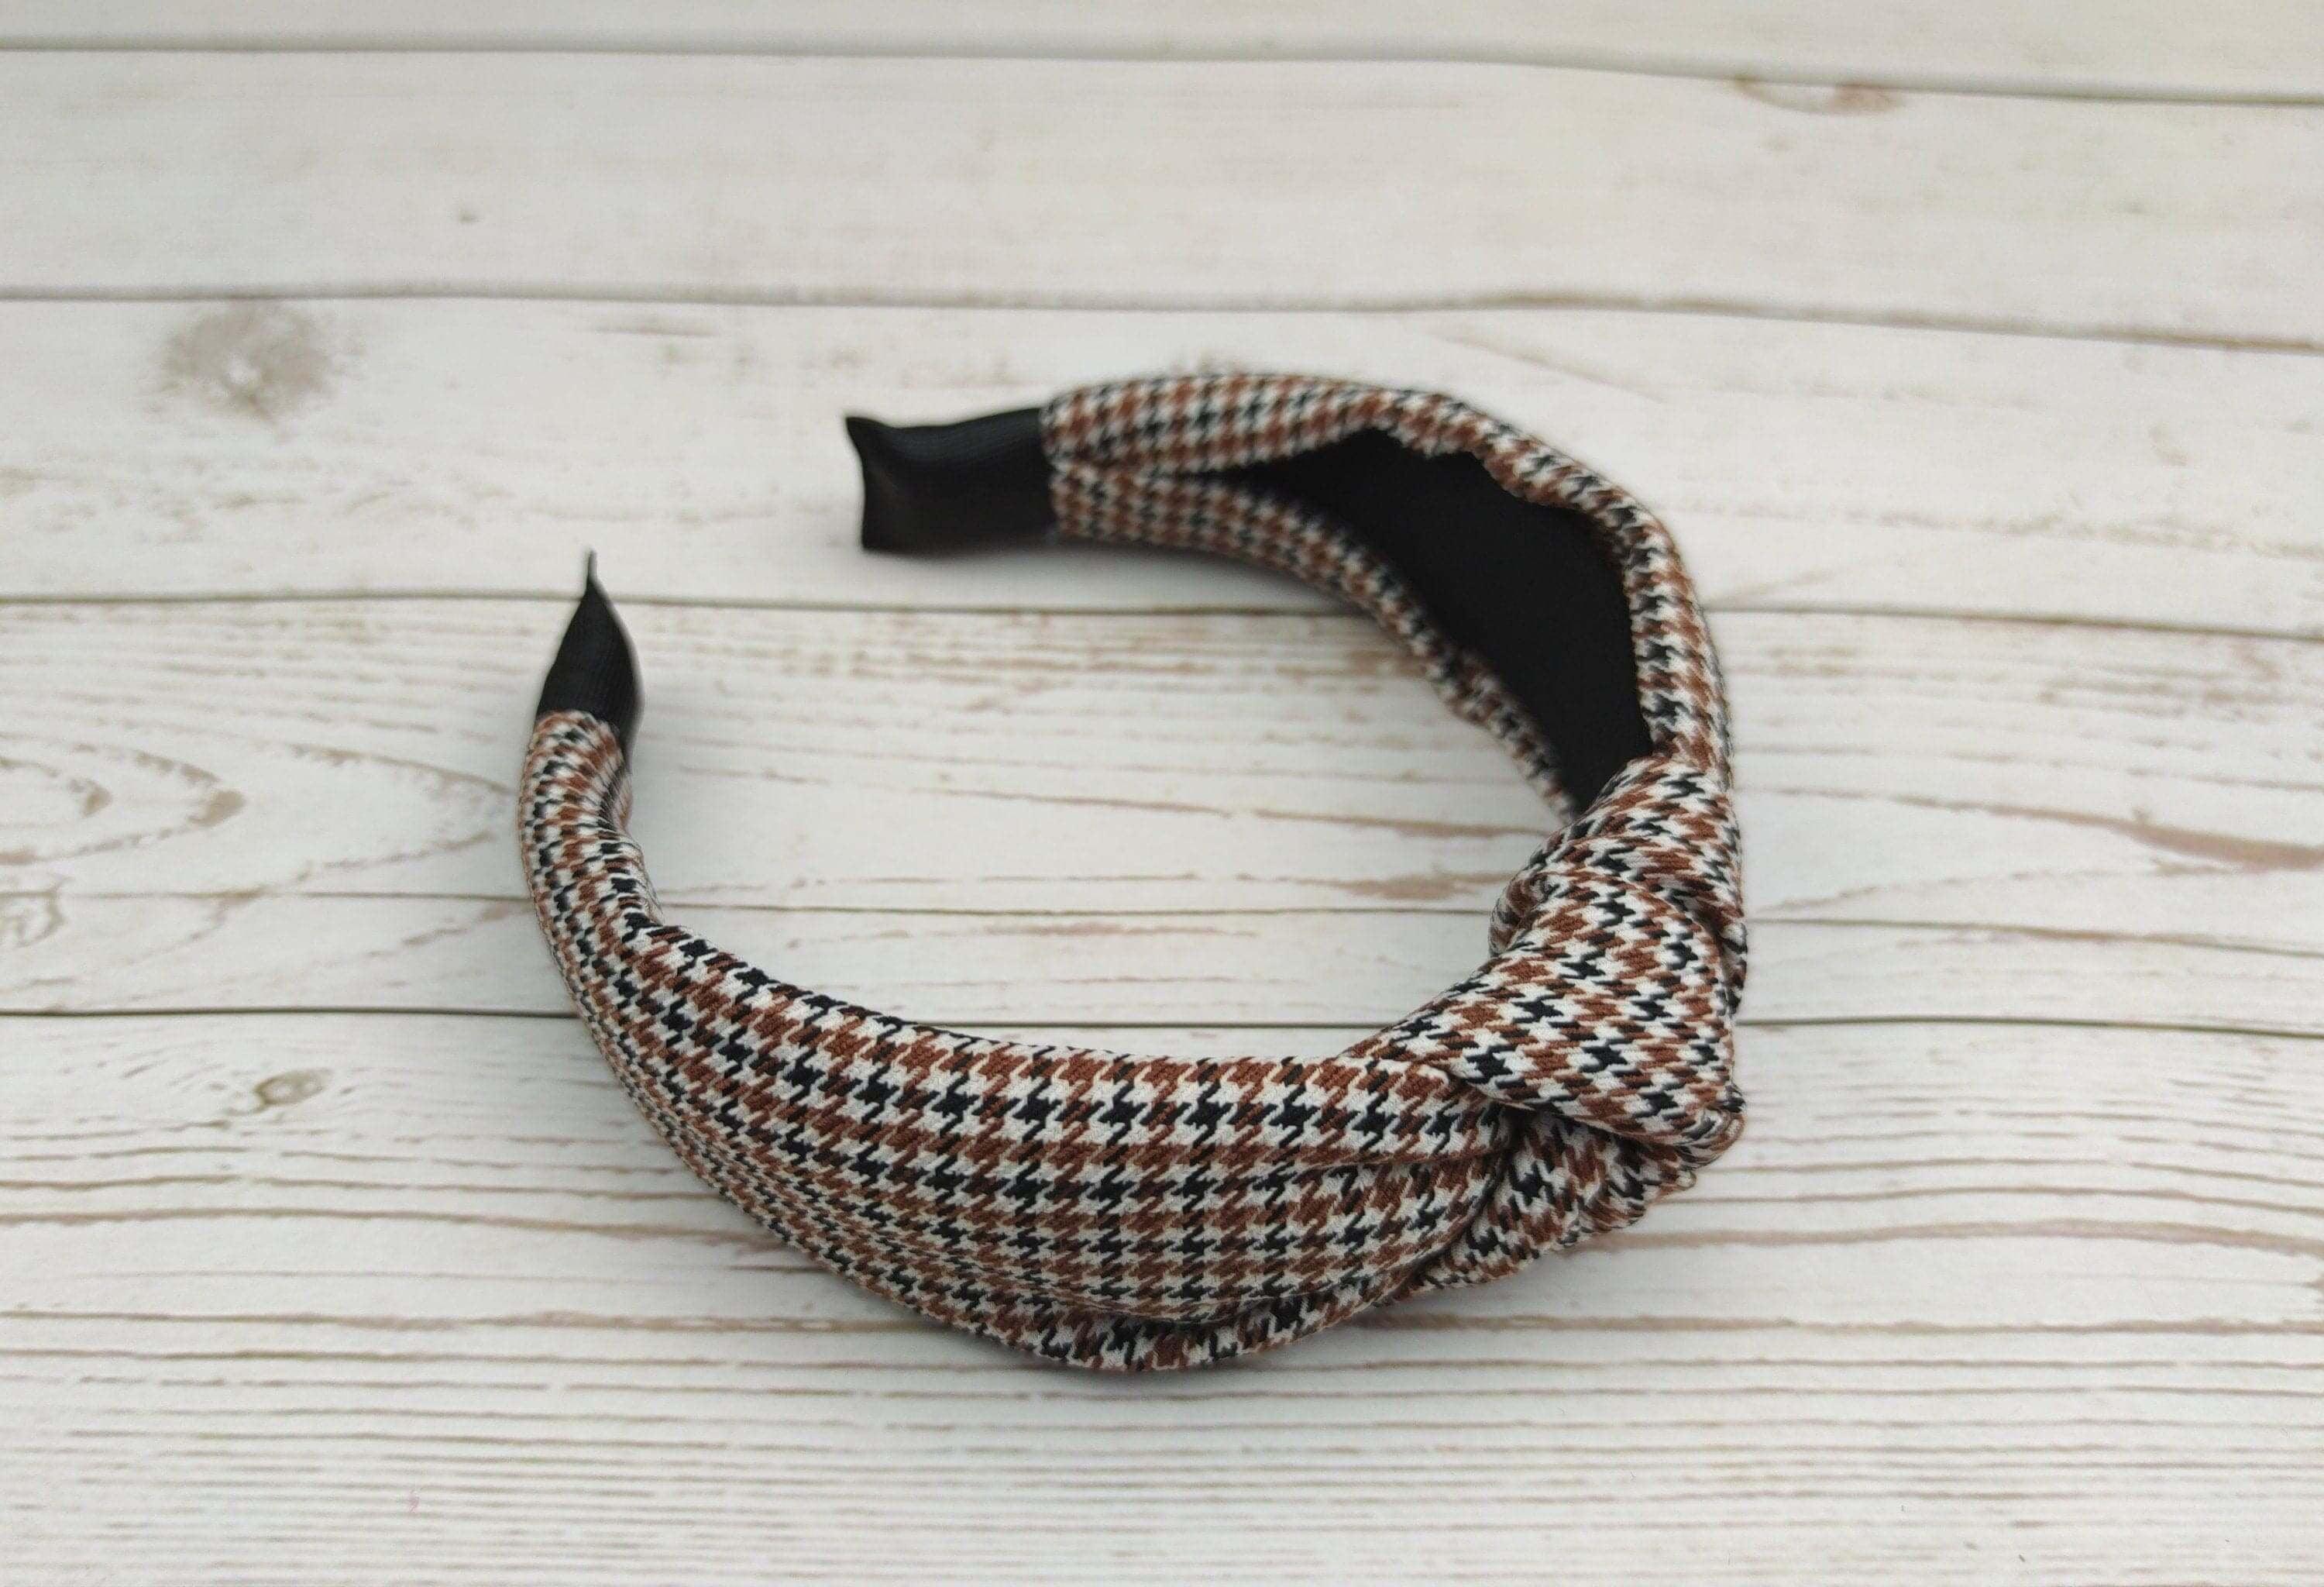 Charming Chic White, Brown and Black Knotted Headband with Plaid Pattern for Women - Perfect for College! available at Moyoni Design